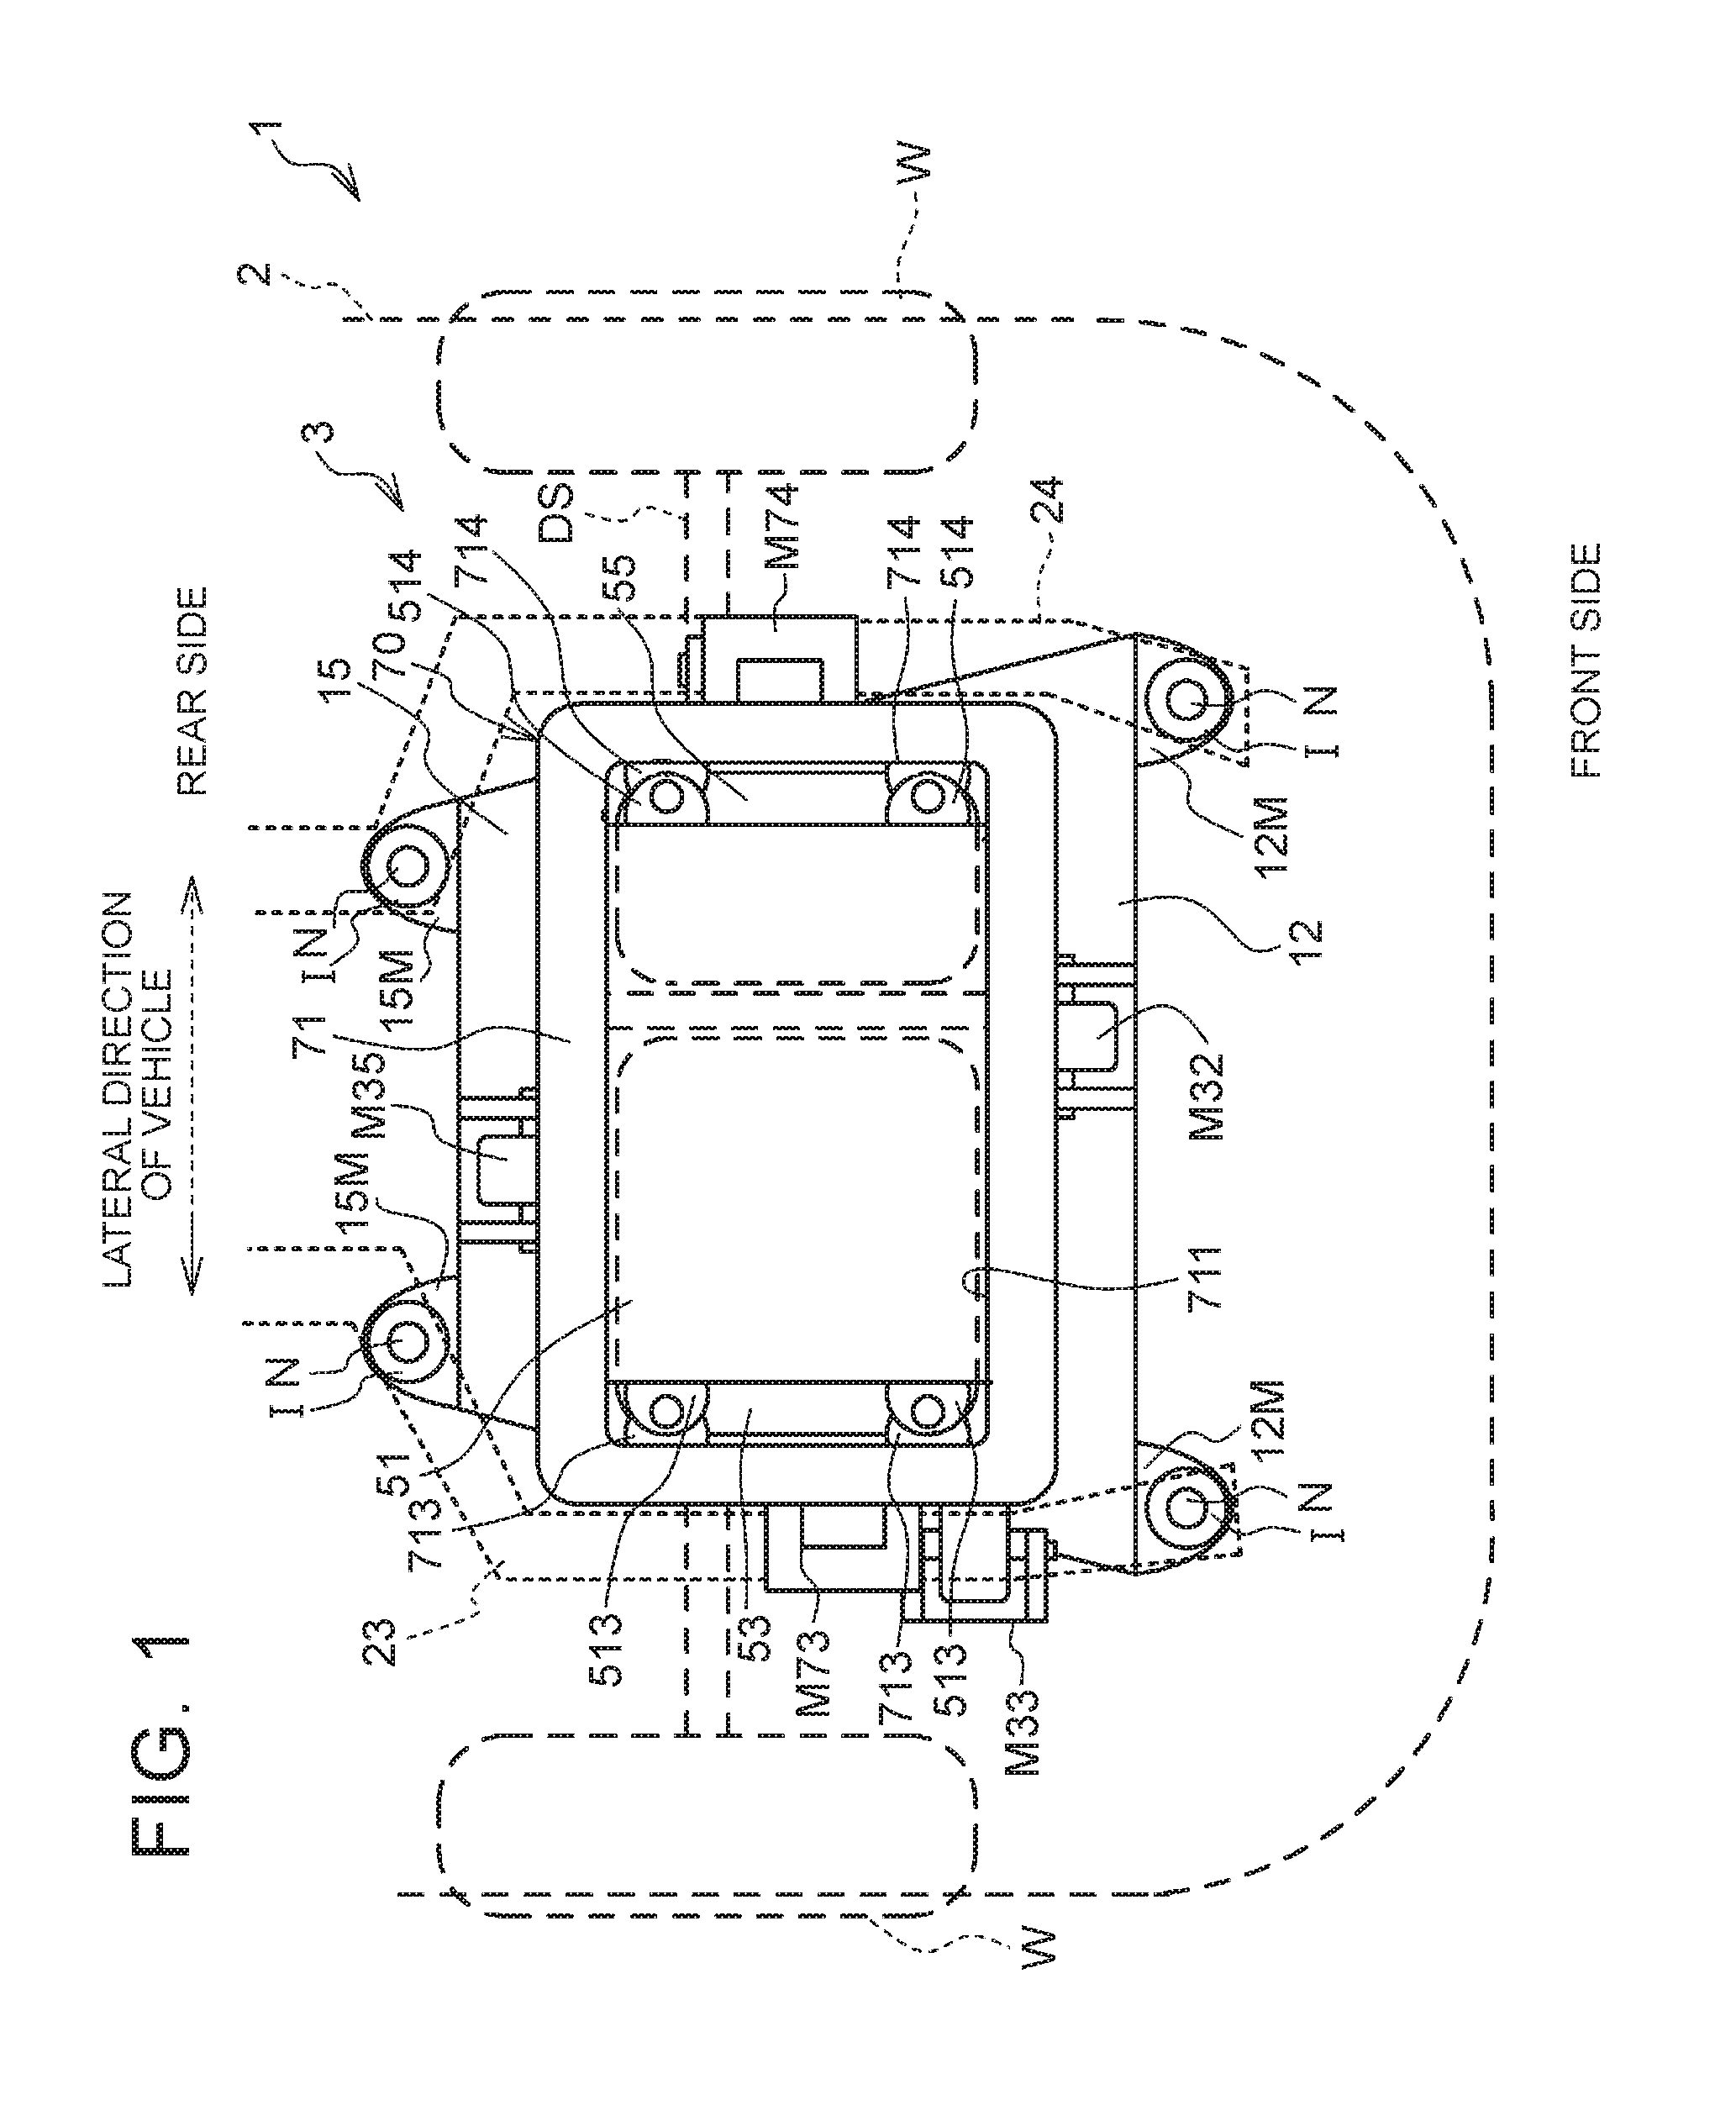 Electric vehicle, holding mechanism, and method of manufacturing electric vehicle